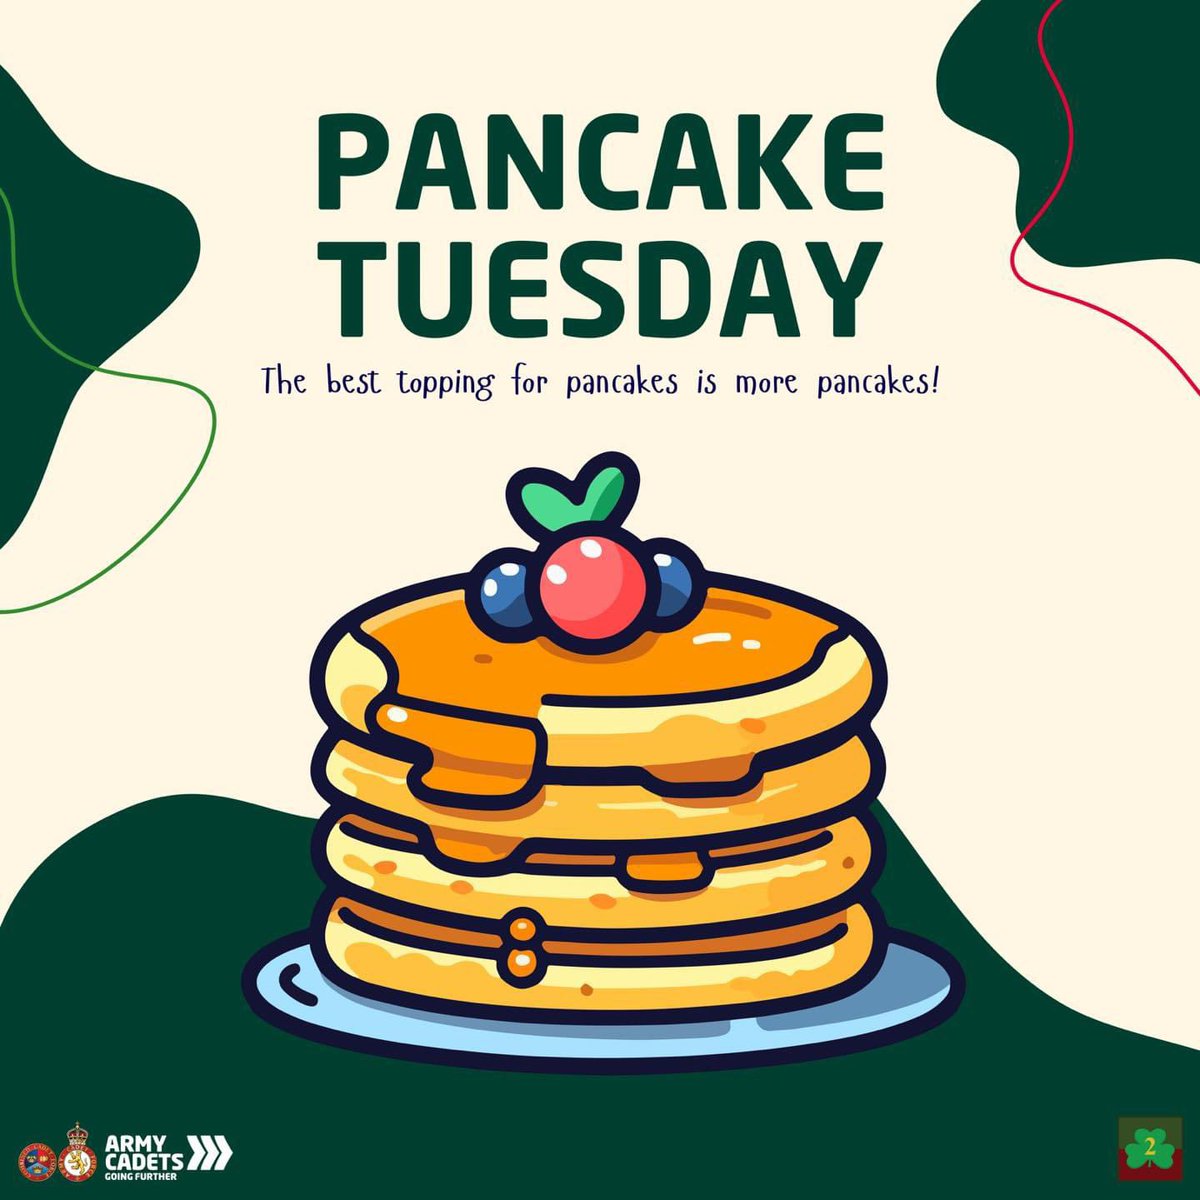 “𝓕𝓵𝓲𝓹 𝓕𝓵𝓲𝓹 𝓗𝓸𝓸𝓻𝓪𝔂” Happiness is pancakes! Who doesn’t love a pancake 😍 Enjoy your pancakes on this Shrove Tuesday 🥞 #ShroveTuesday #CadetsNI #PancakeTuesday #Pancakes #ArmyCadets #GoingFurther